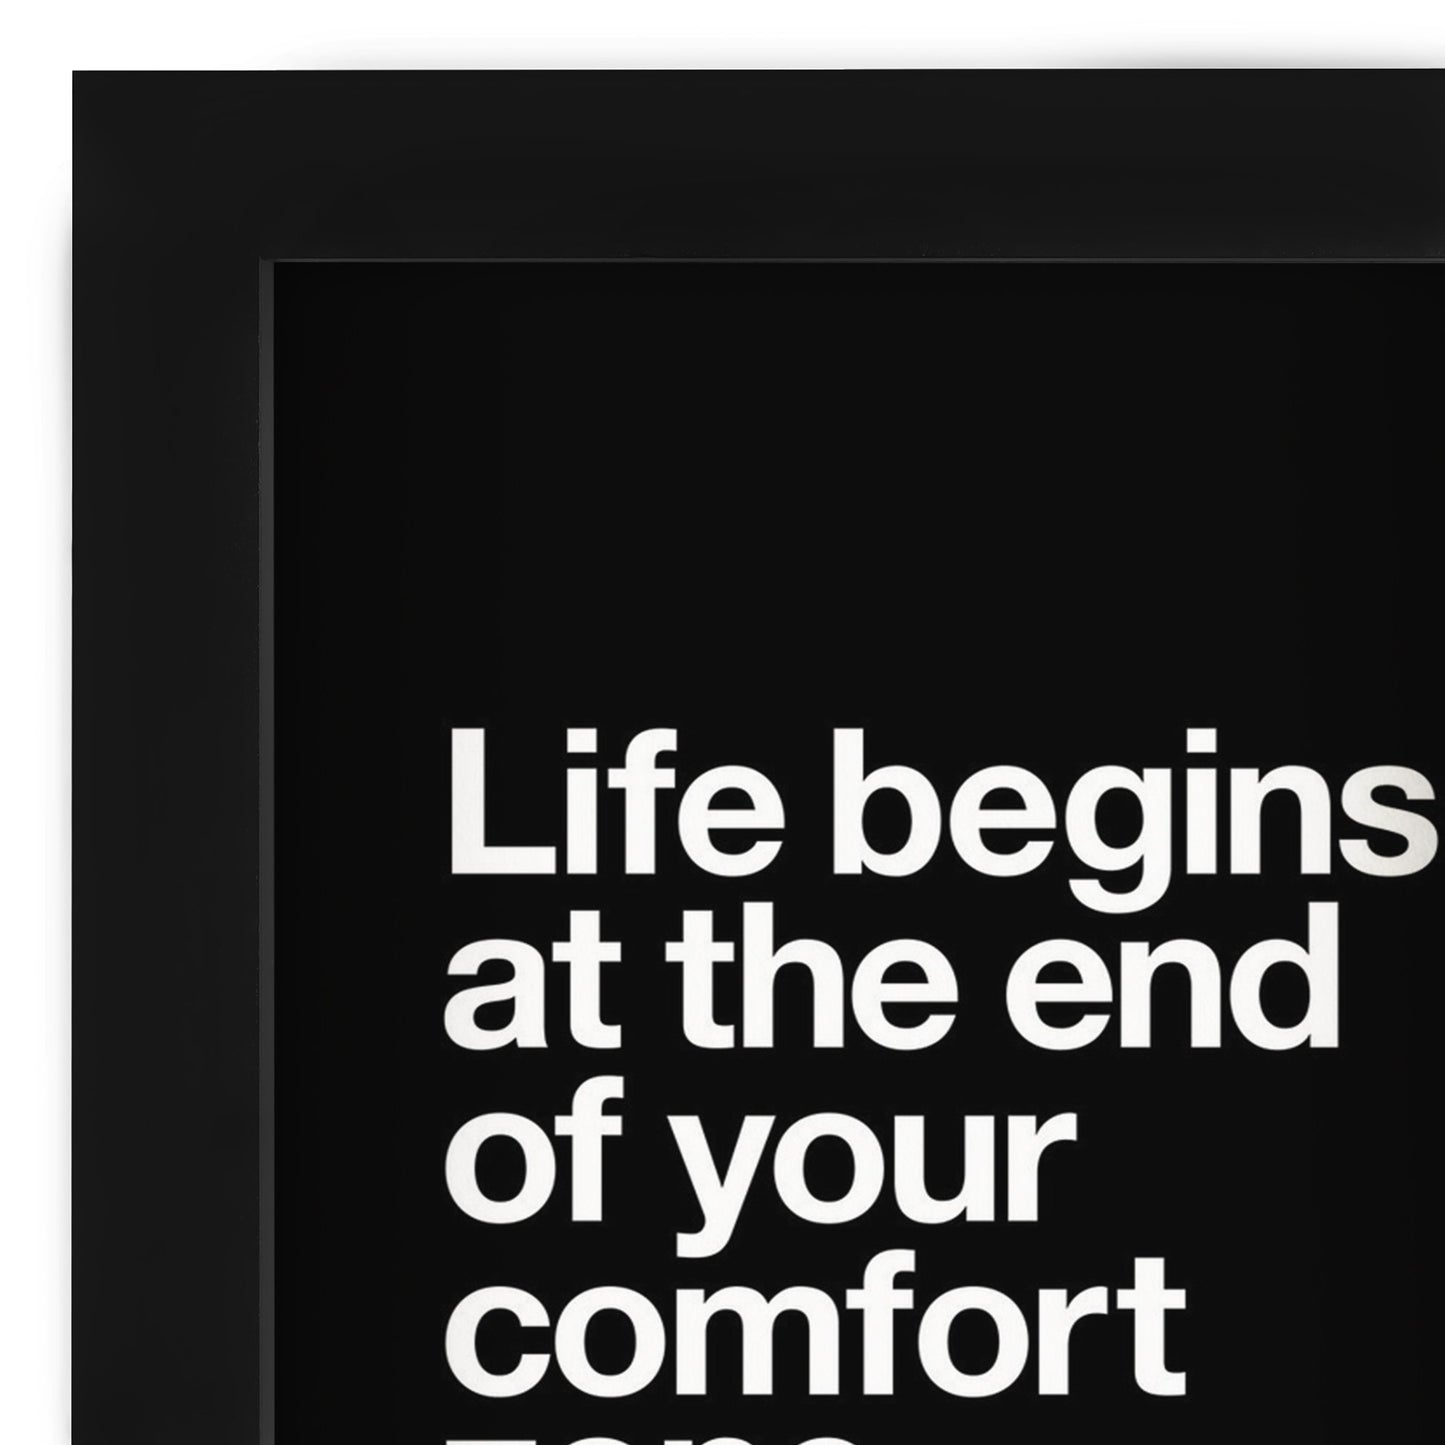 Life Begins At The End Of Your Comfort Zone By Motivated Type - Shadow Box Framed Art - Americanflat